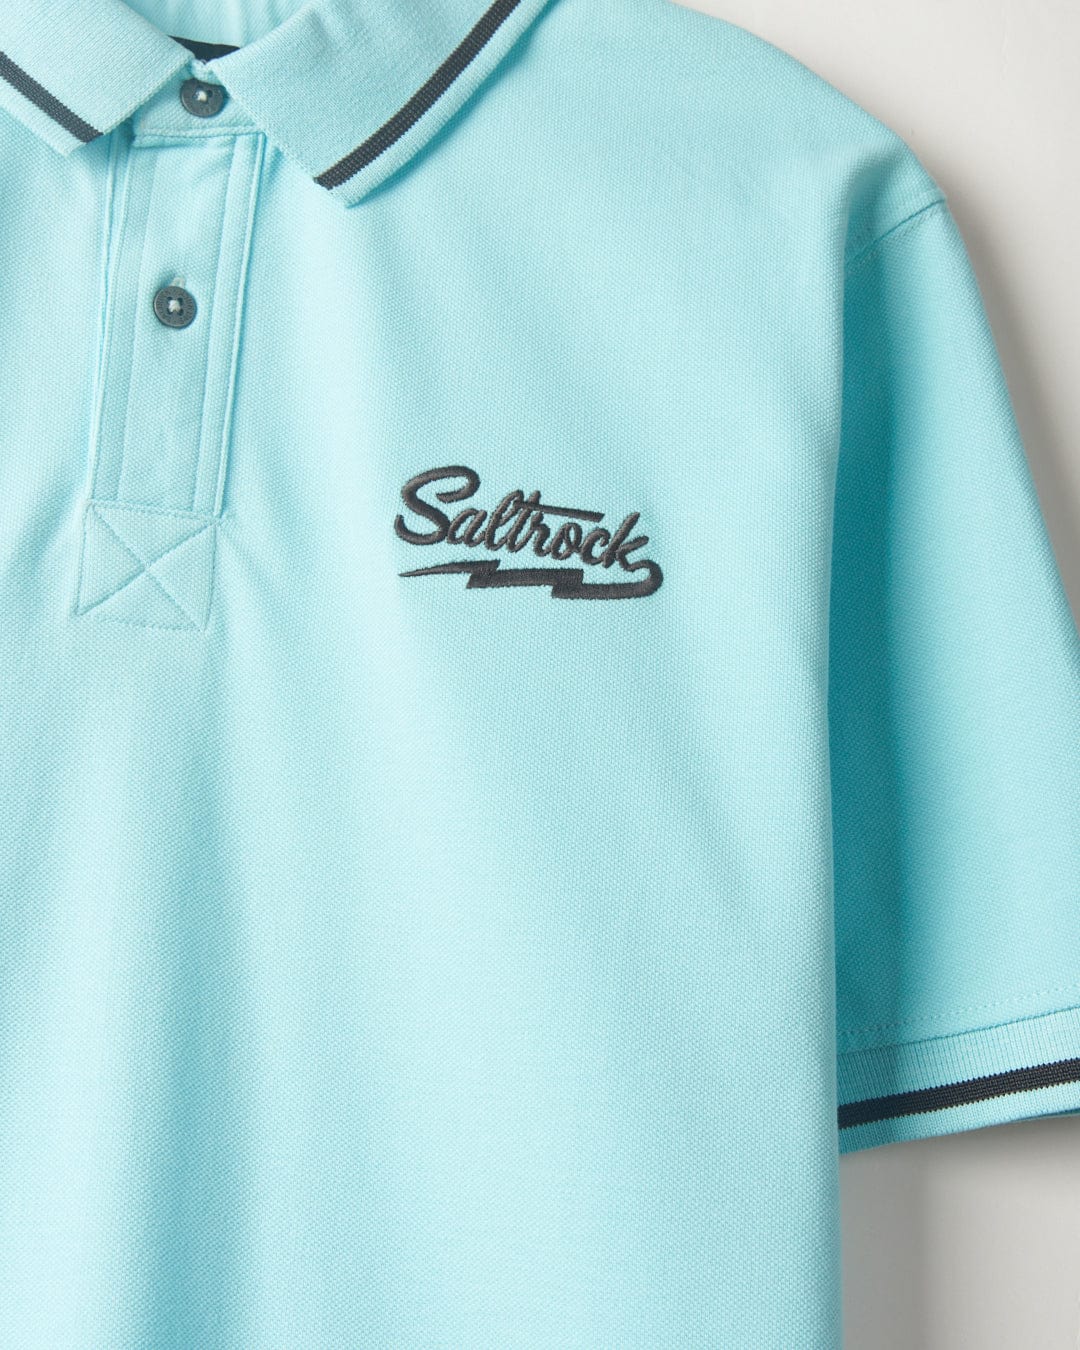 A Strike Logo - Mens Short Sleeve Polo Shirt - Light Blue made from 100% cotton with a collar and short sleeves. The shirt features a Saltrock embroidered logo on the left chest and contrast stripe details on the collar and sleeve ends.